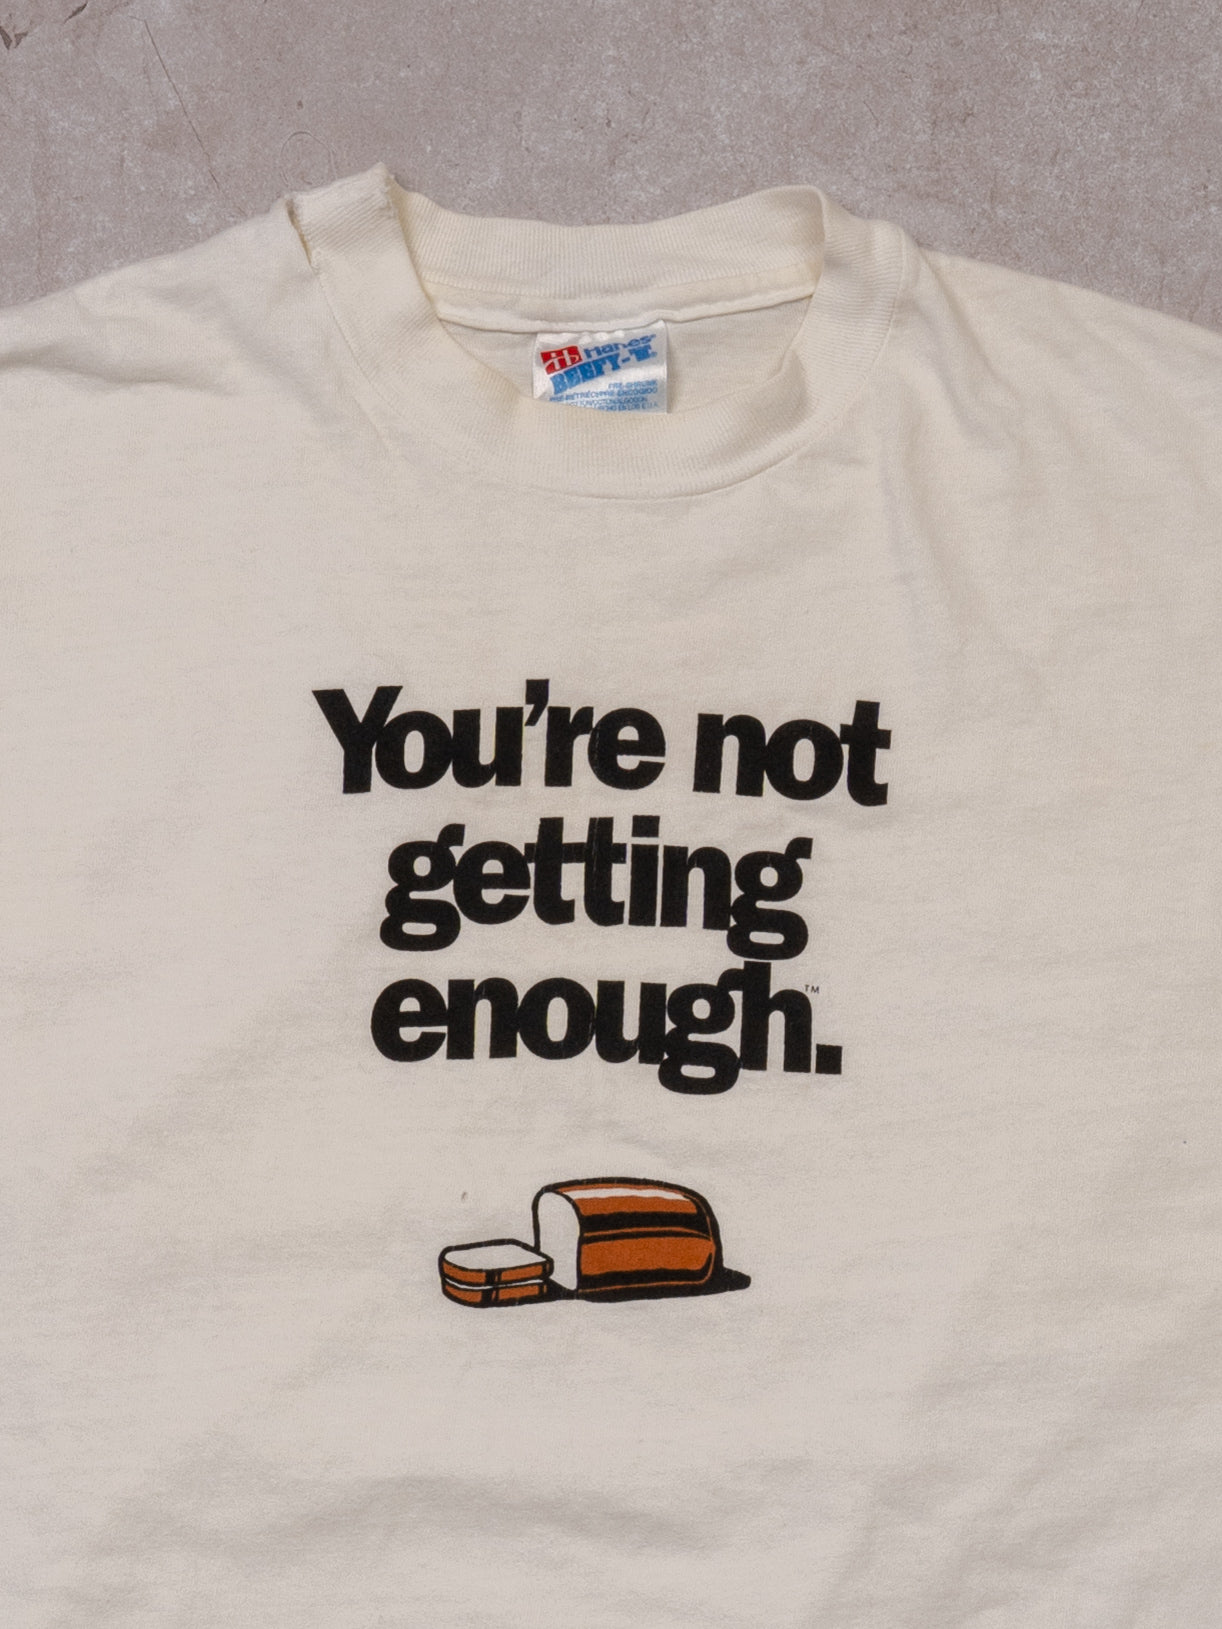 Vintage 90s White 'Youre Not Getting Enough Bread' Tee (L)